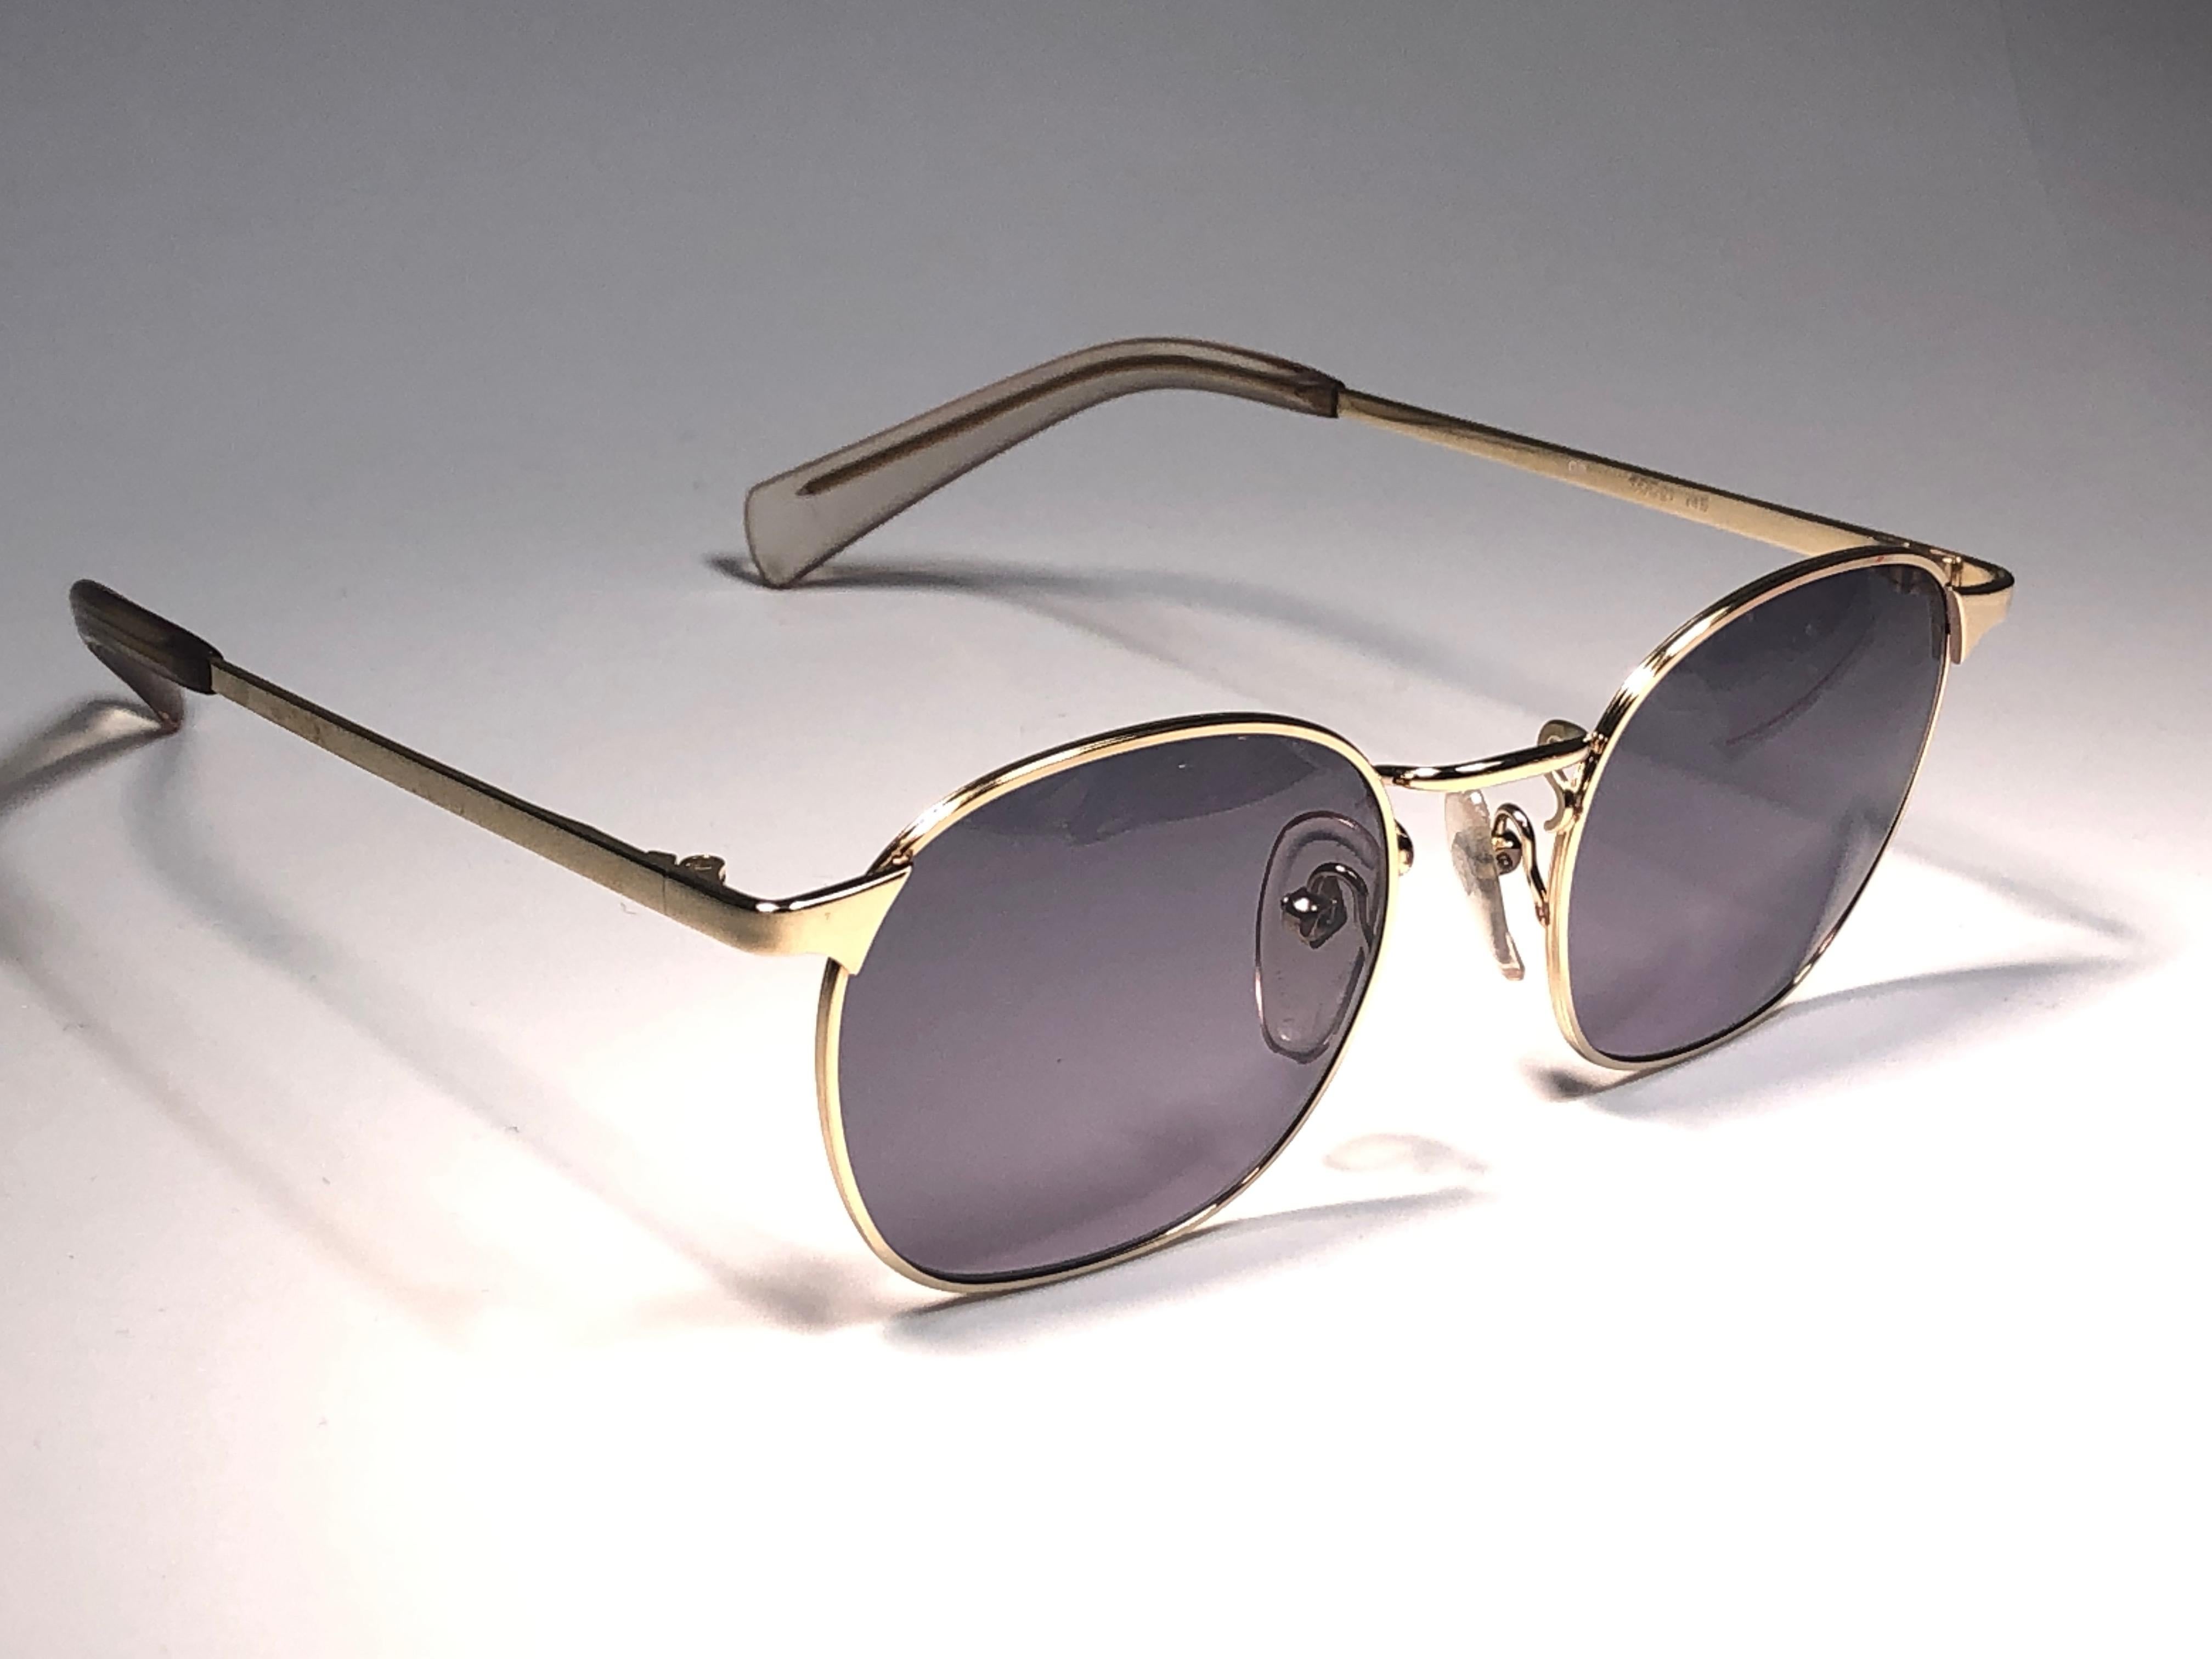 New Jean Paul Gaultier medium silver frame. 
Spotless grey lenses that complete a ready to wear JPG look.

Amazing design with strong yet intricate details.
Design and produced in the 1990's.
New, never worn or displayed.
This item may show minor